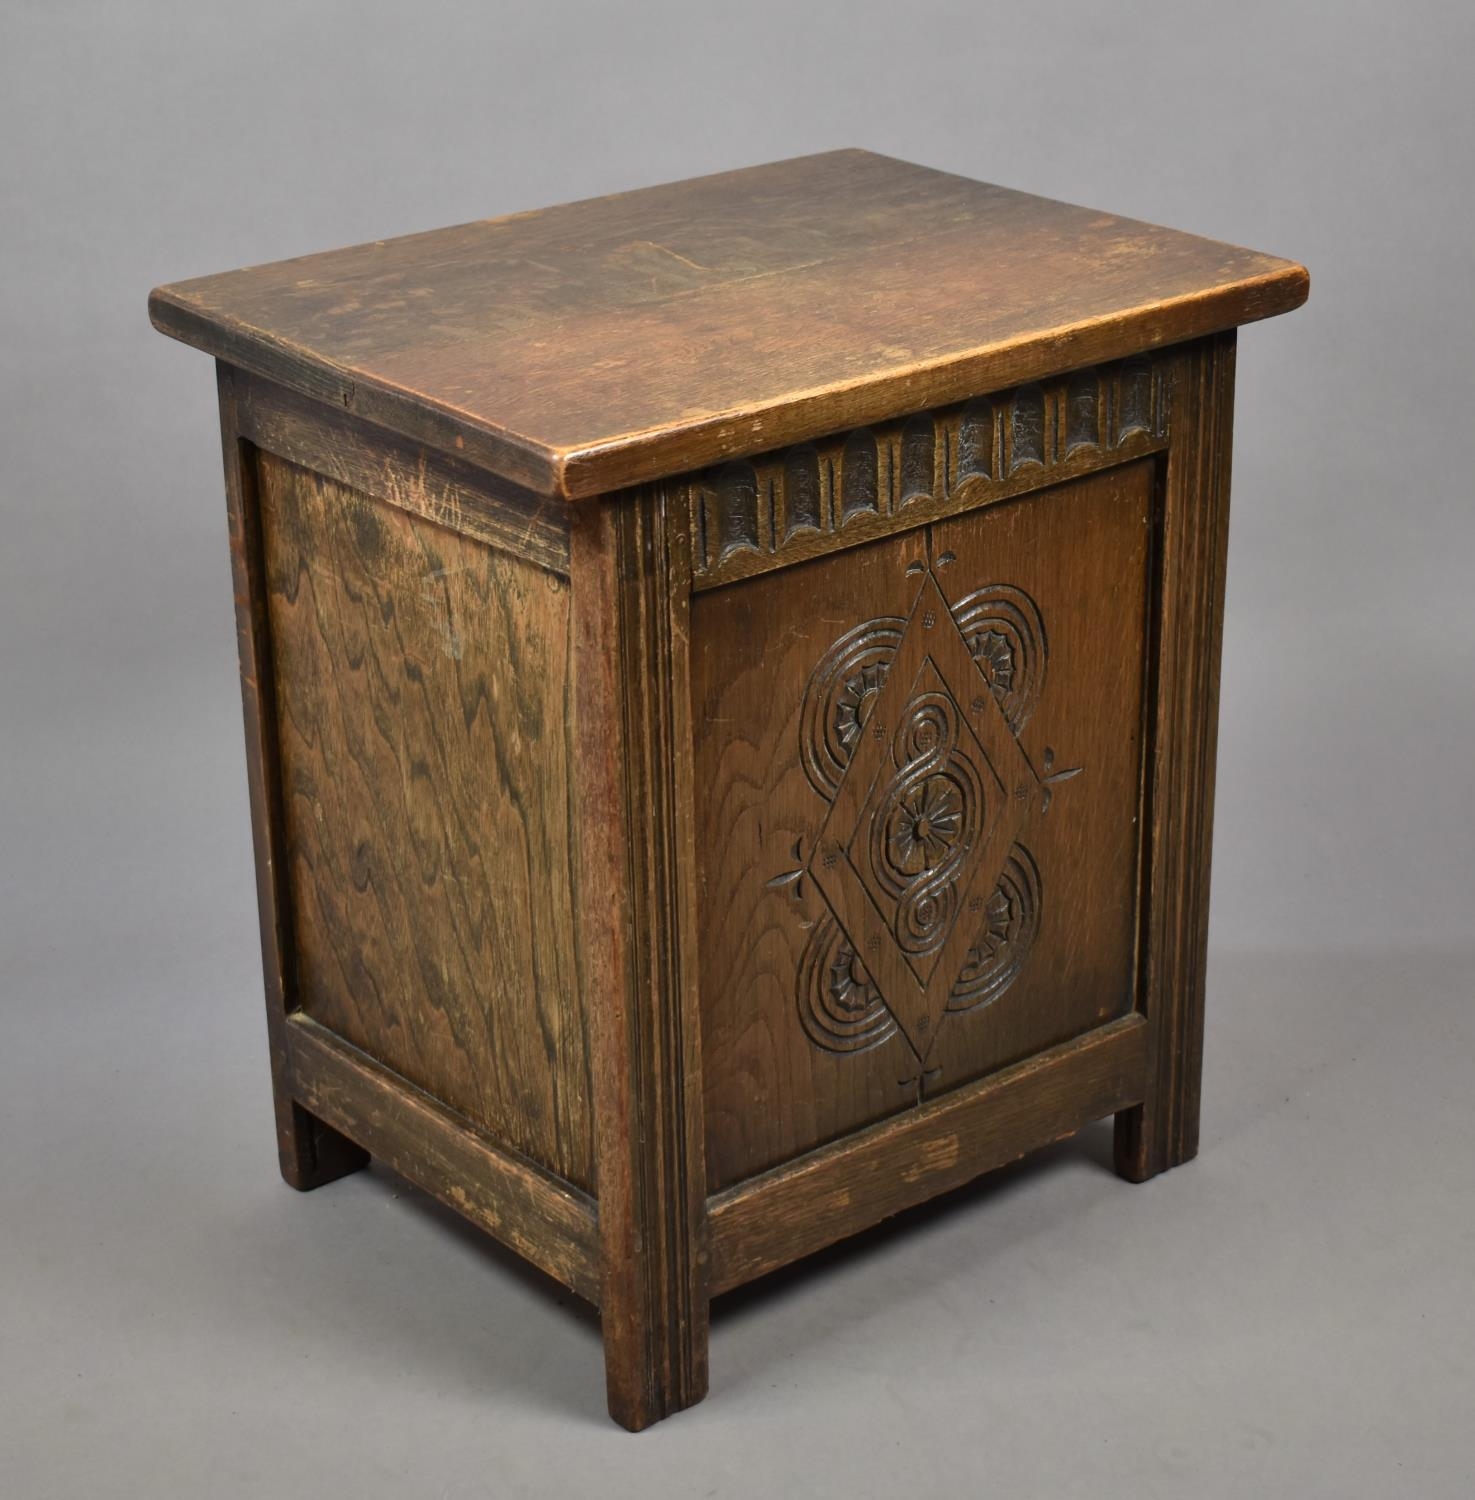 A Mid 20th Century Oak Lift Top Coal Box with Carved Decoration and Metal Liner and Shovel, 44cm